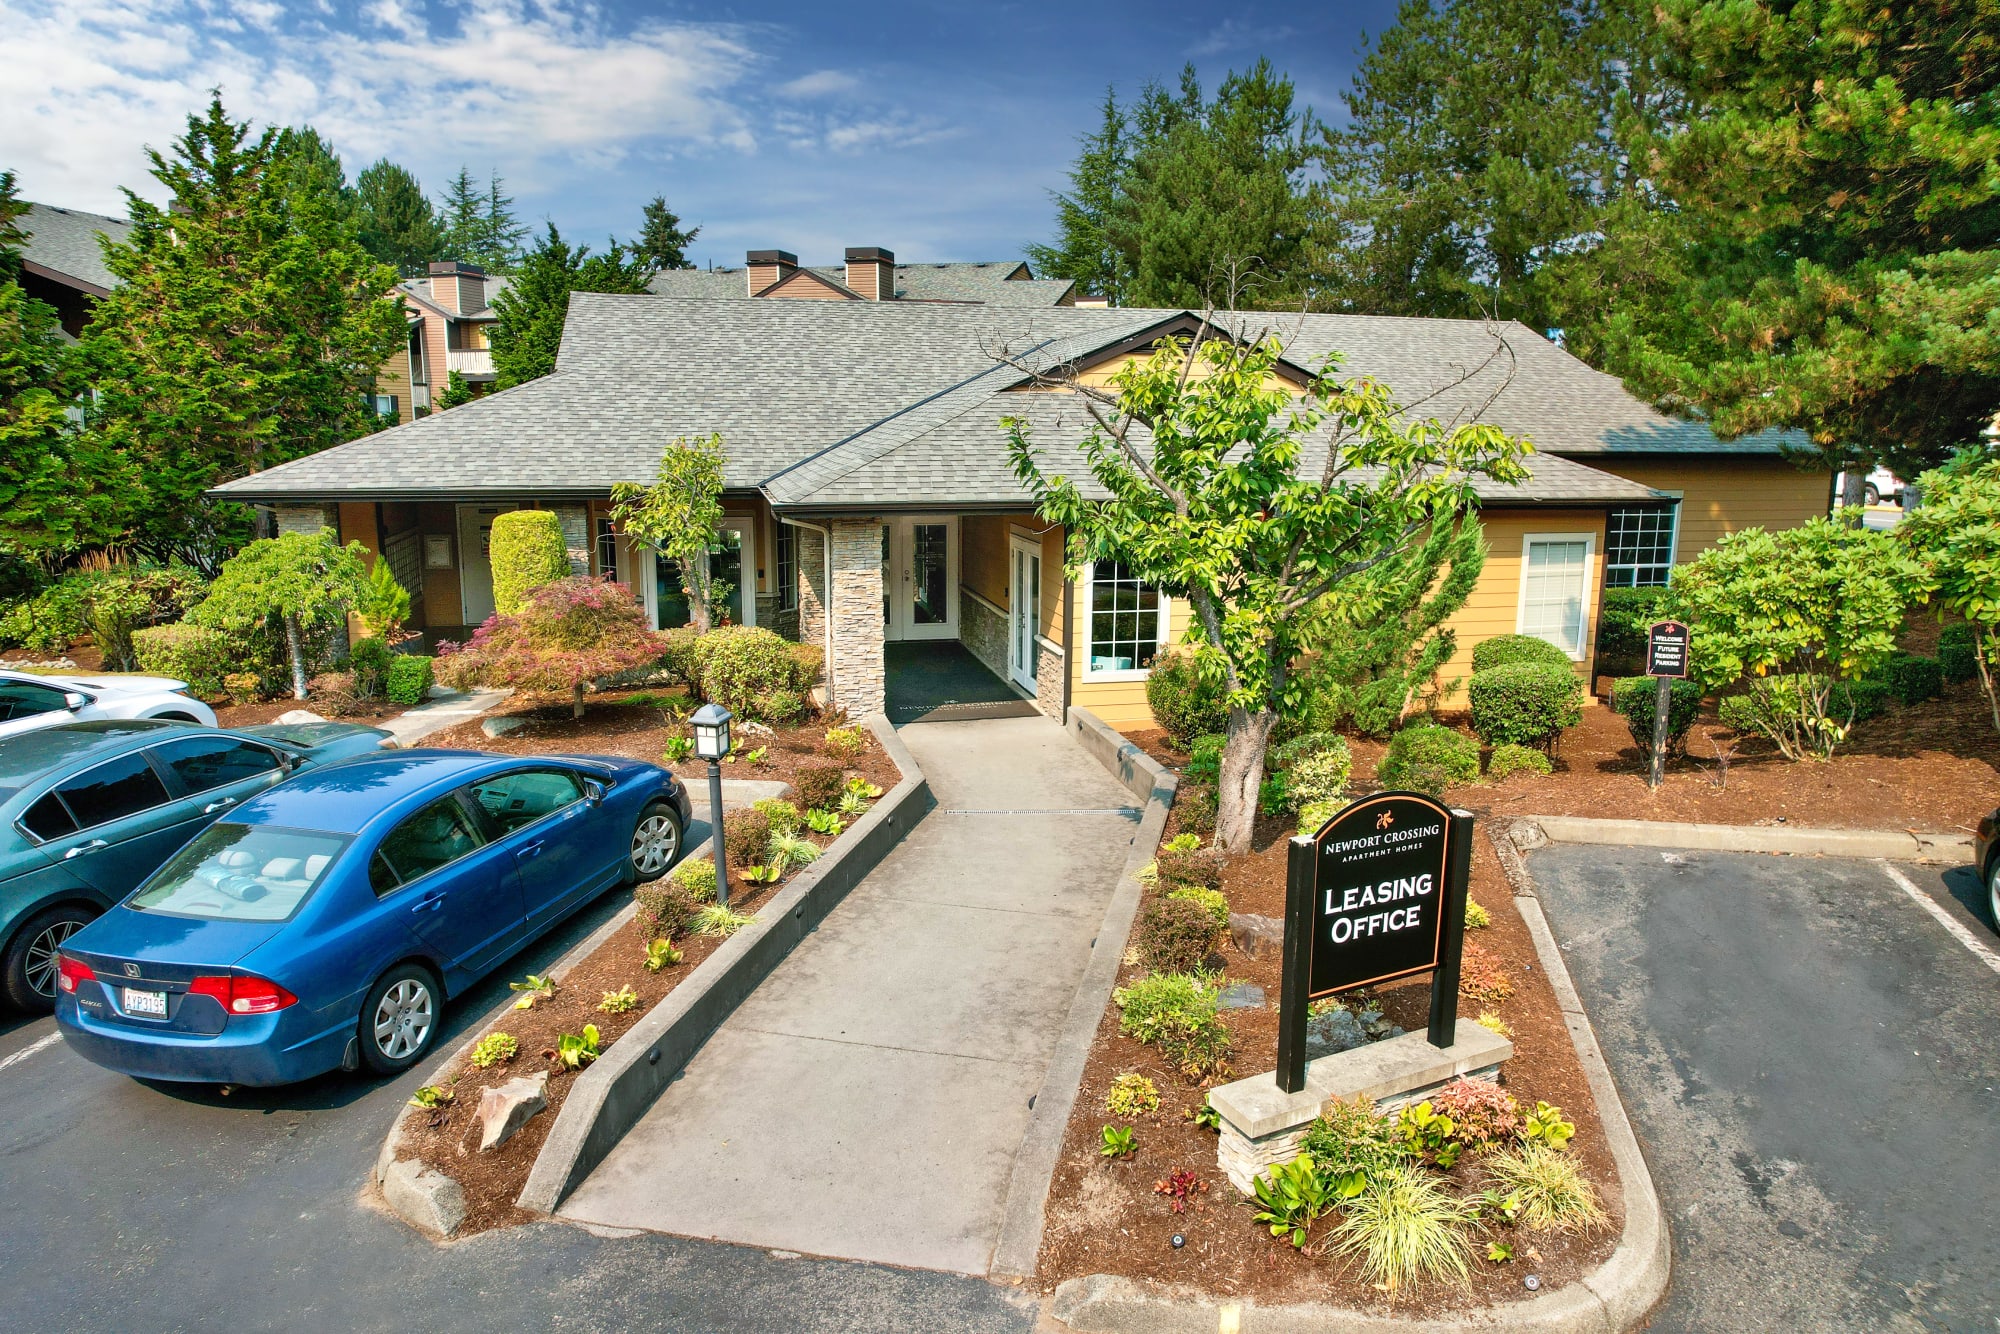 Leasing office entryway at Newport Crossing Apartments in Newcastle, Washington